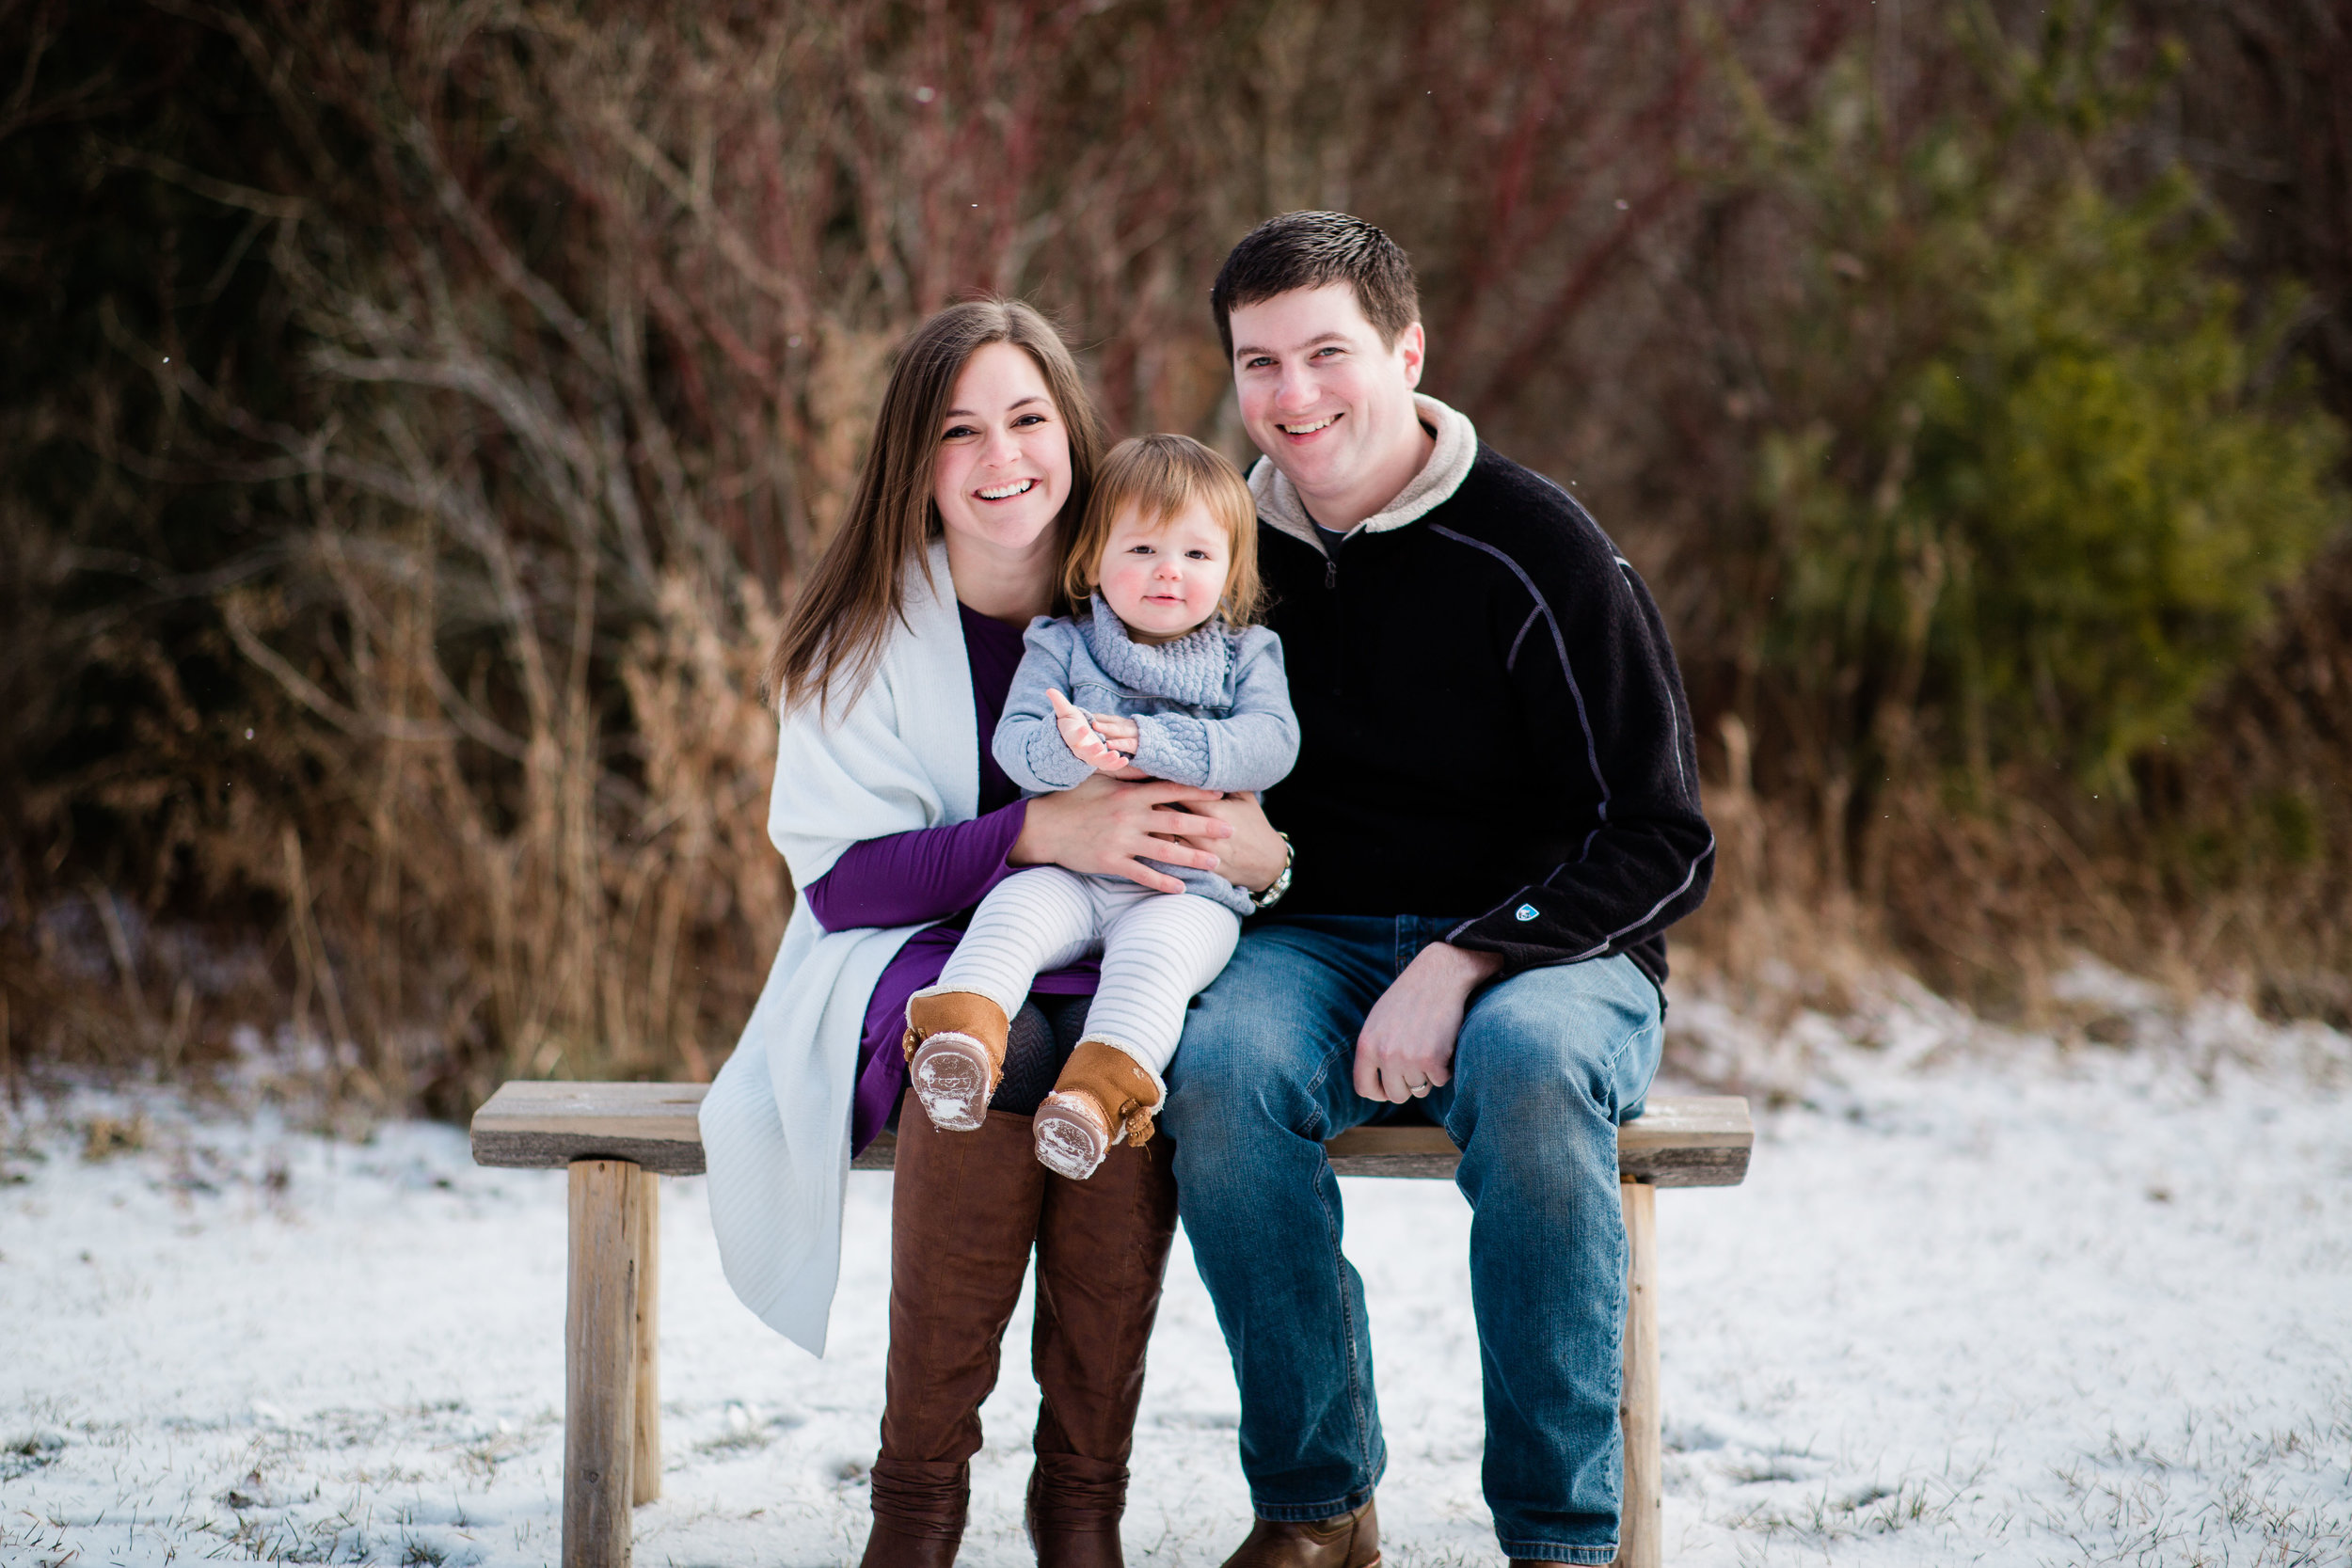 Door County Winter Veal Family Photography Session in Sturgeon Bay, WI